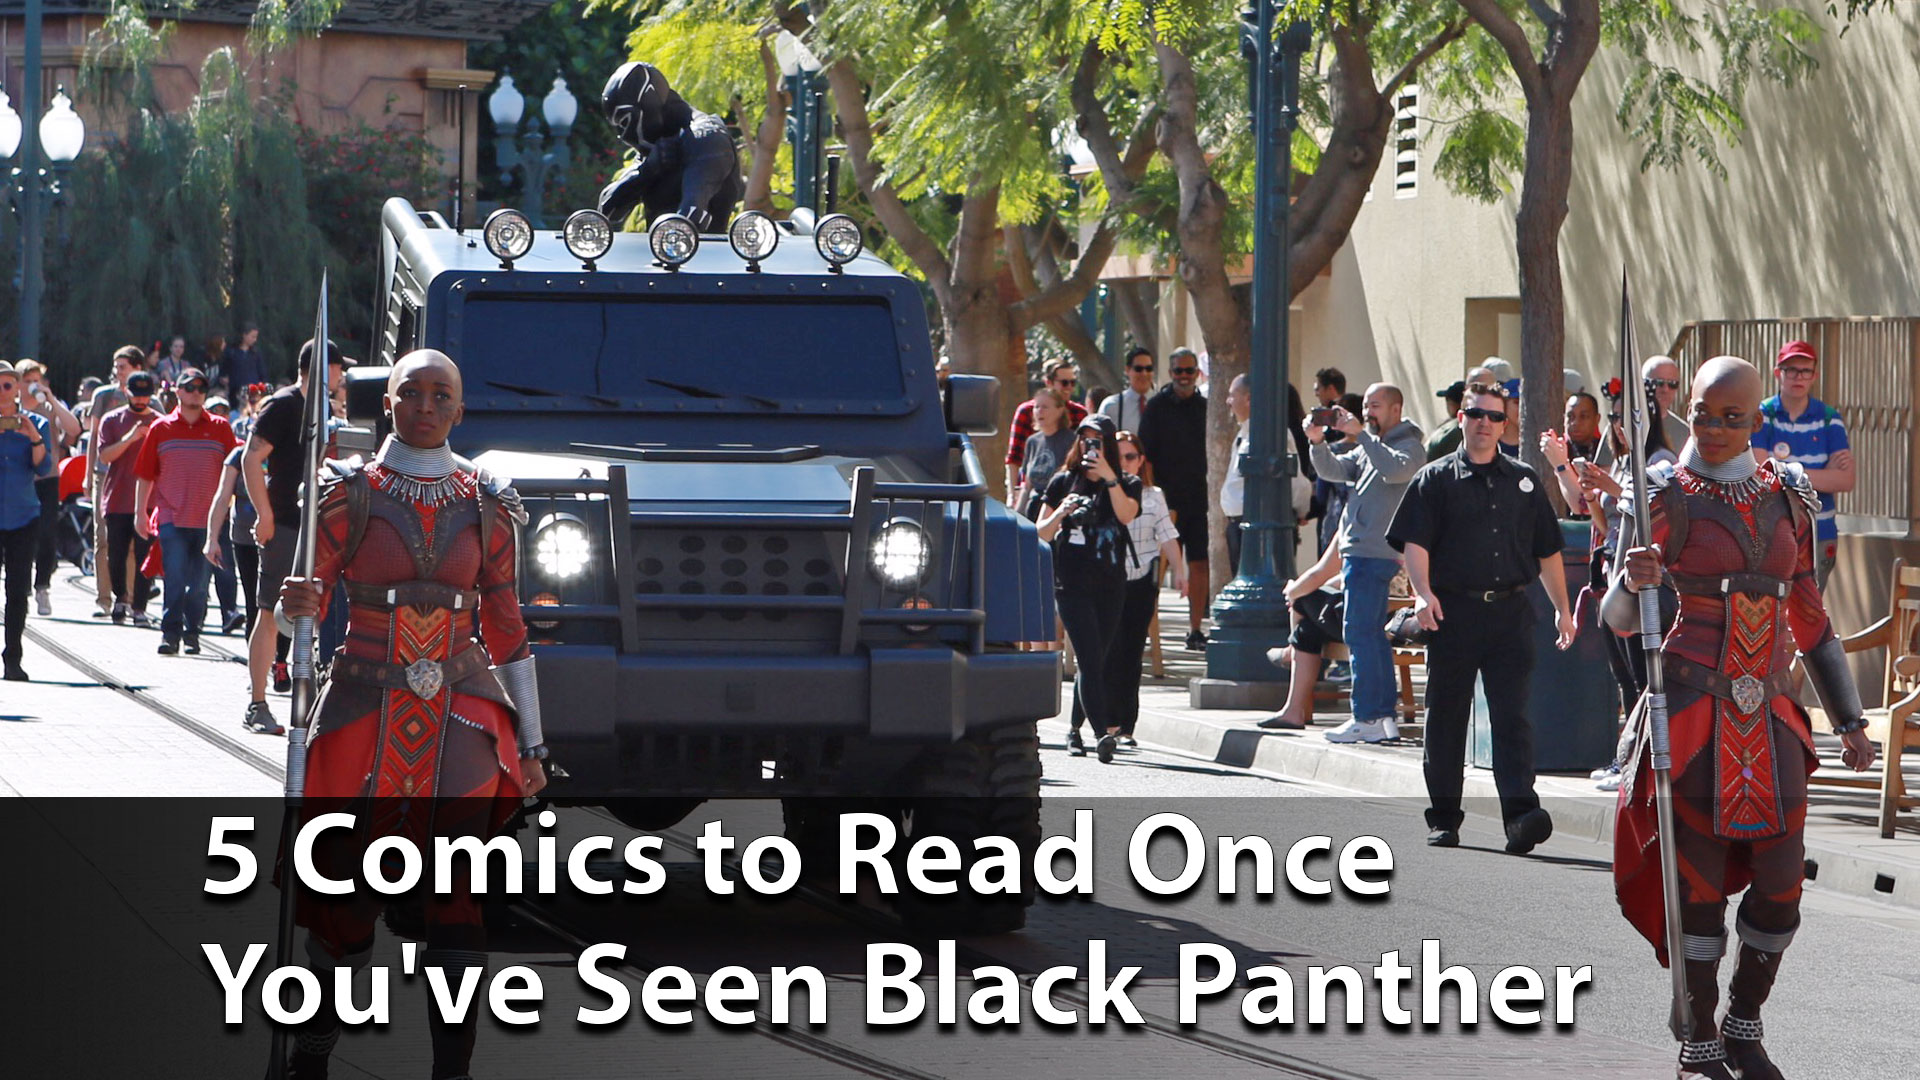 5 Comics to Read Once You've Seen Black Panther